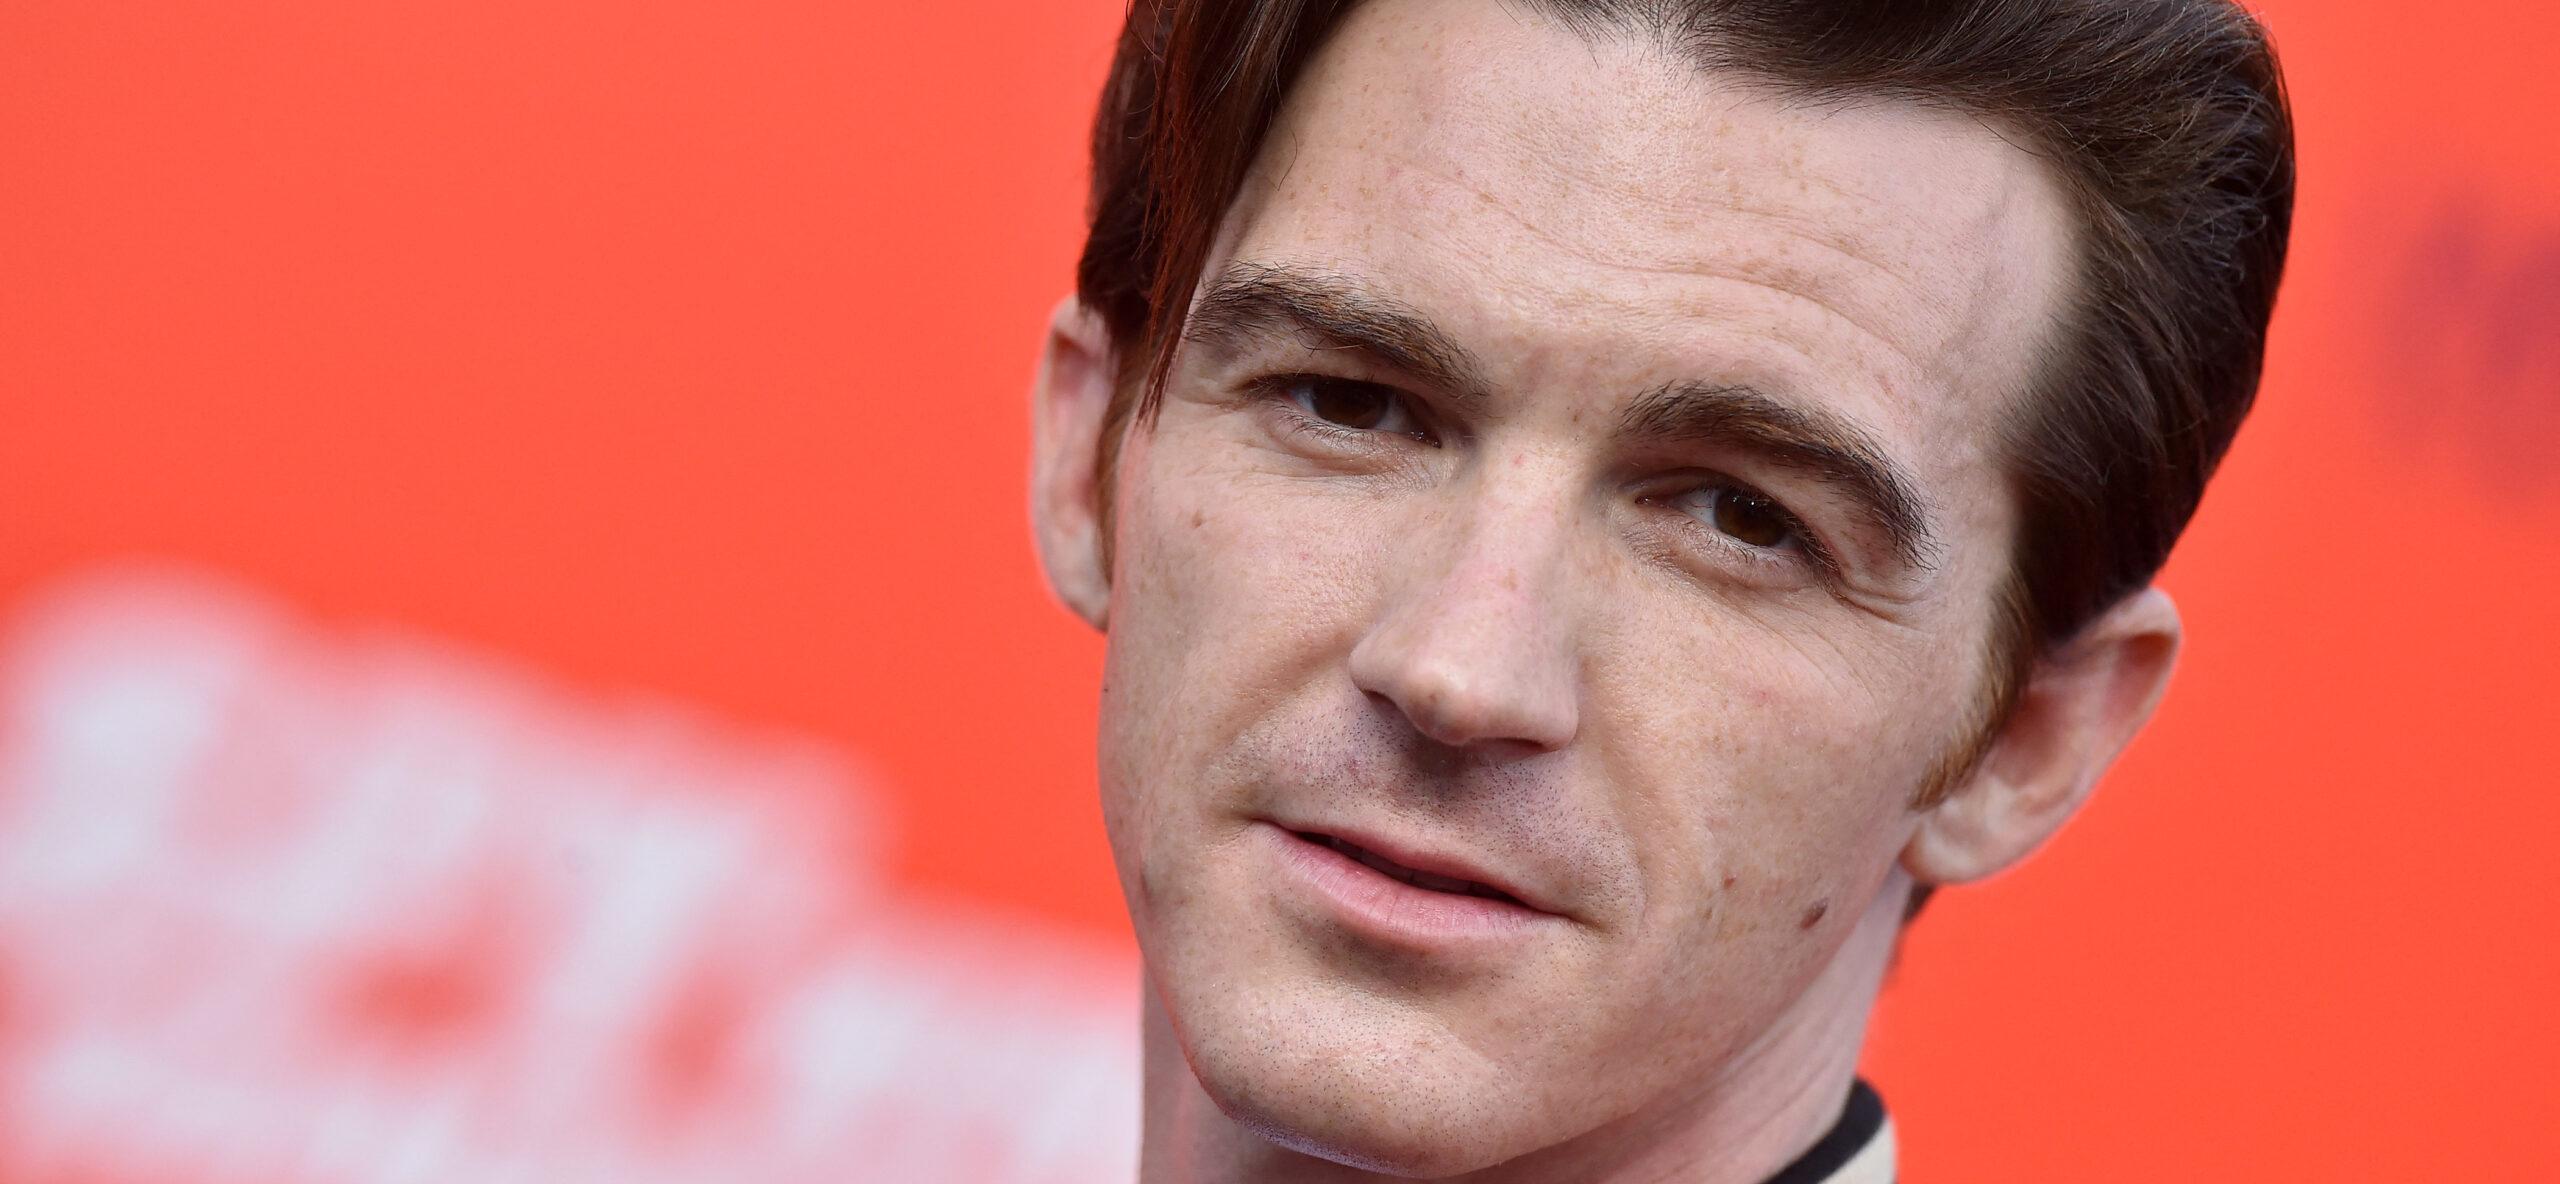 Drake Bell Details ‘Brutal’ & ‘Extensive’ S-xual Abuse By Nickelodeon Dialogue Coach